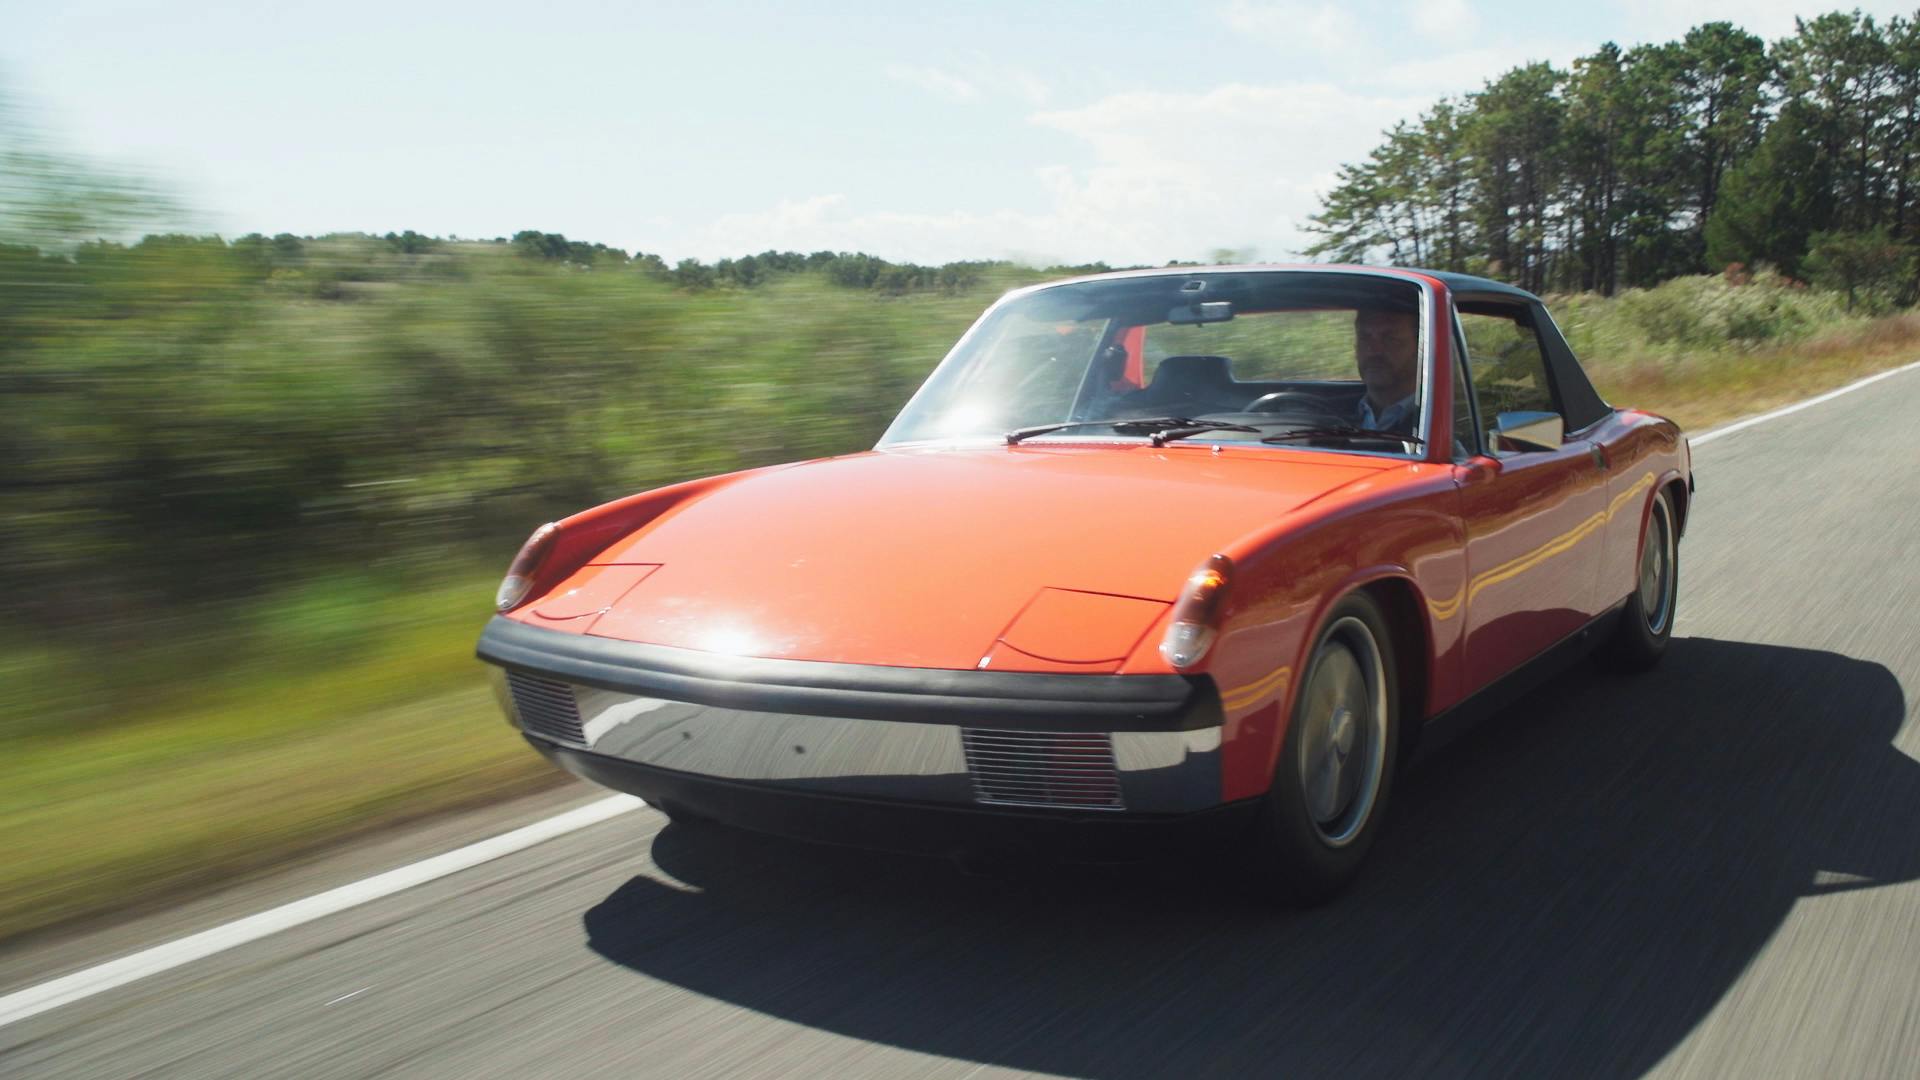 Drives Unexpected - Justin Bell - in a Porsche 914